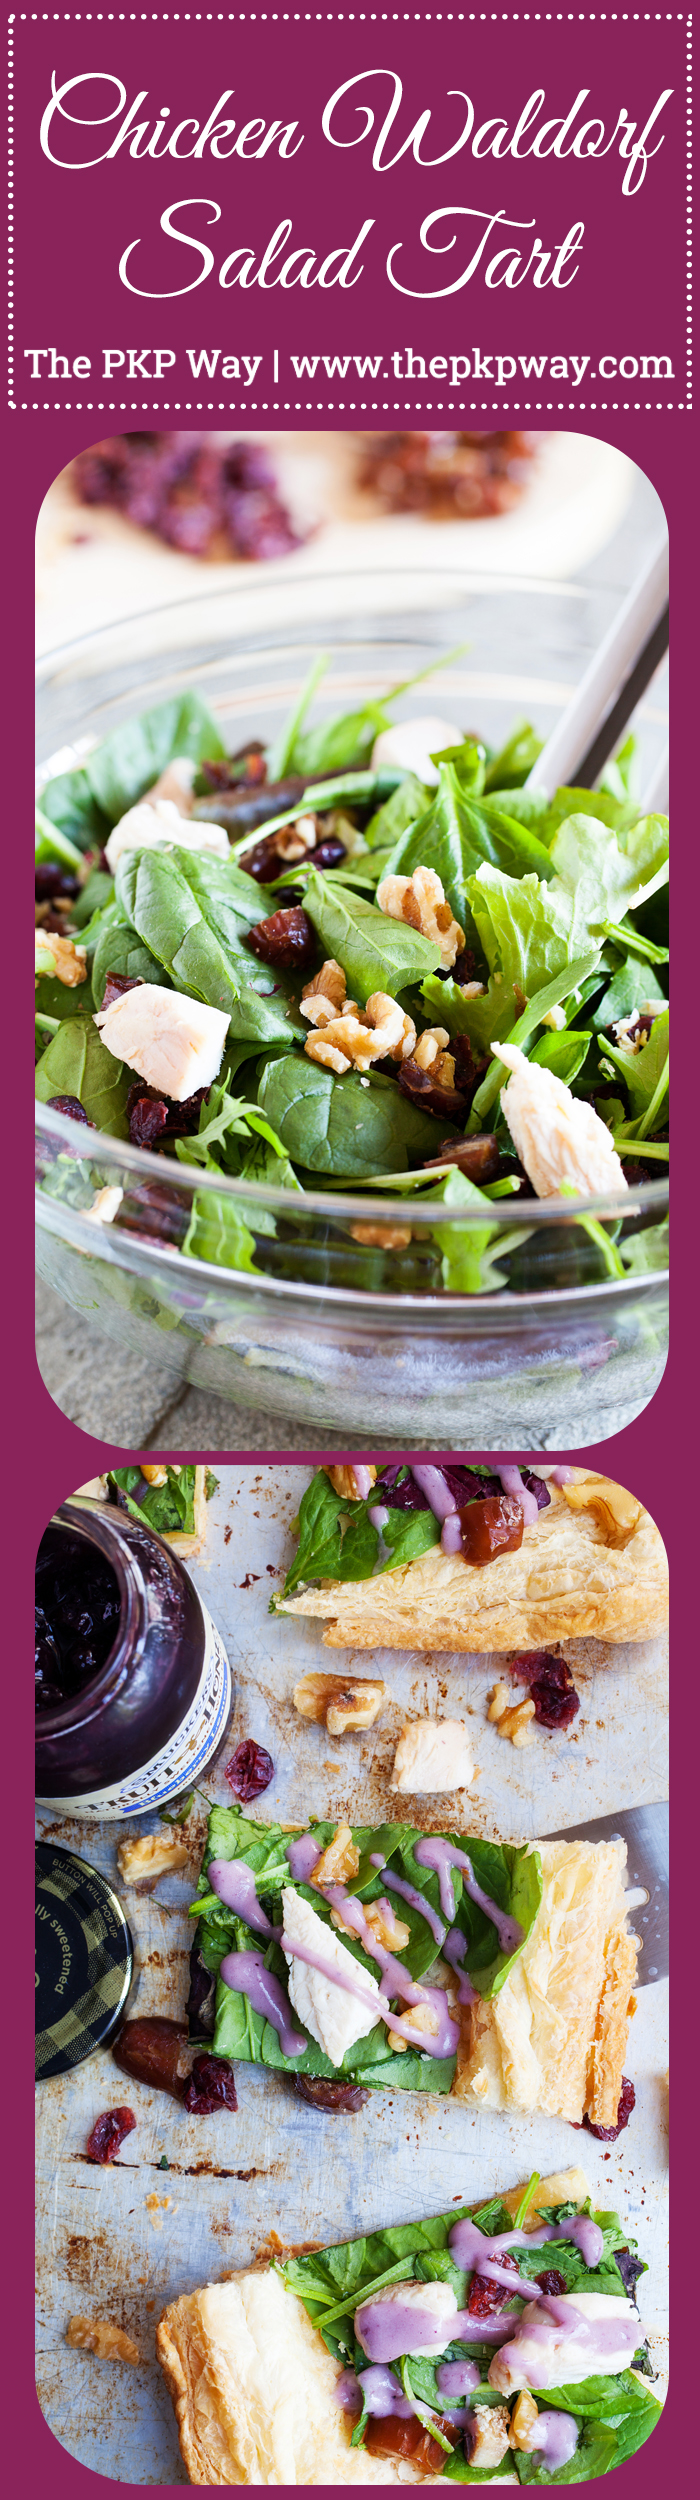 Puff pastry topped with fresh greens and a drizzle of blueberry lemon dressing make this Chicken Waldorf Salad Tart a delicious appetizer or light lunch option for all your holiday parties. 